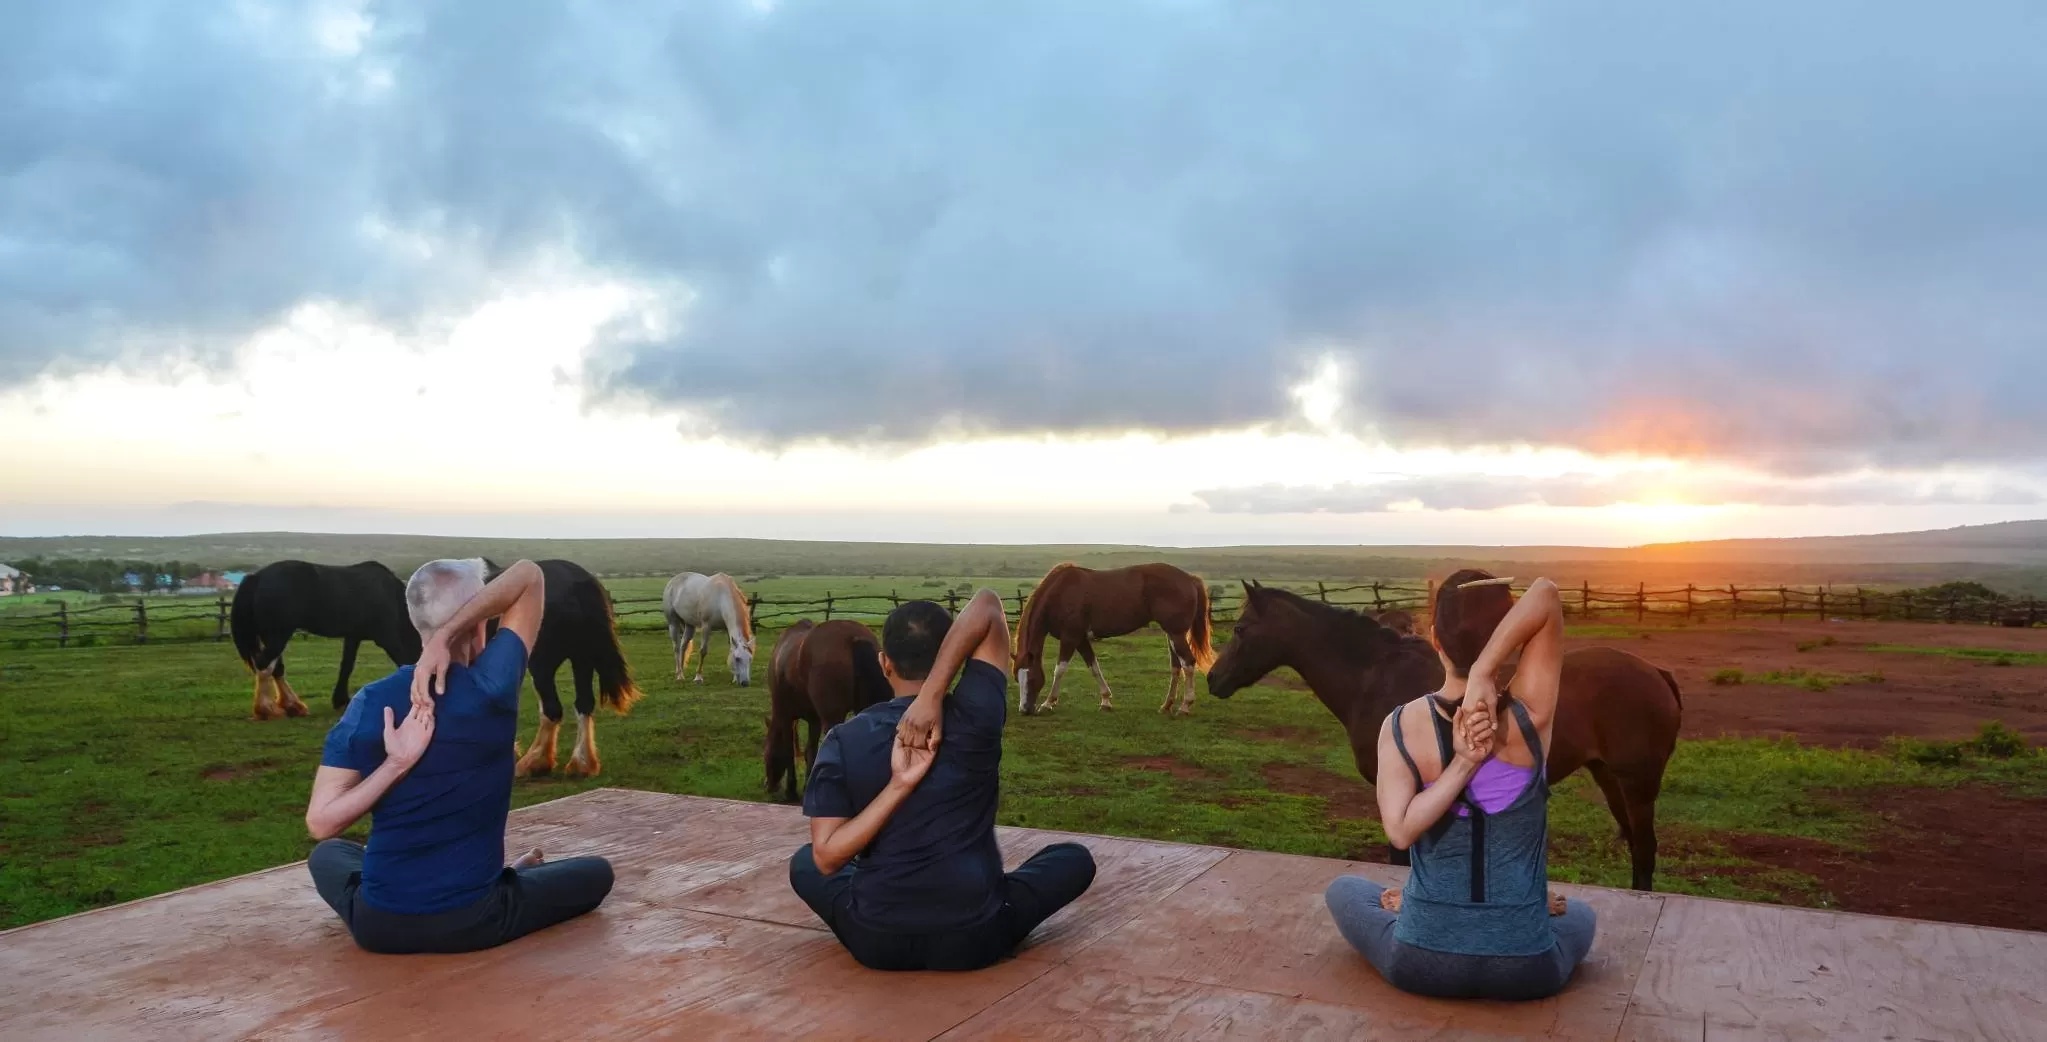 Three people doing yoga on the floor outside amongst horses and nature at sunset